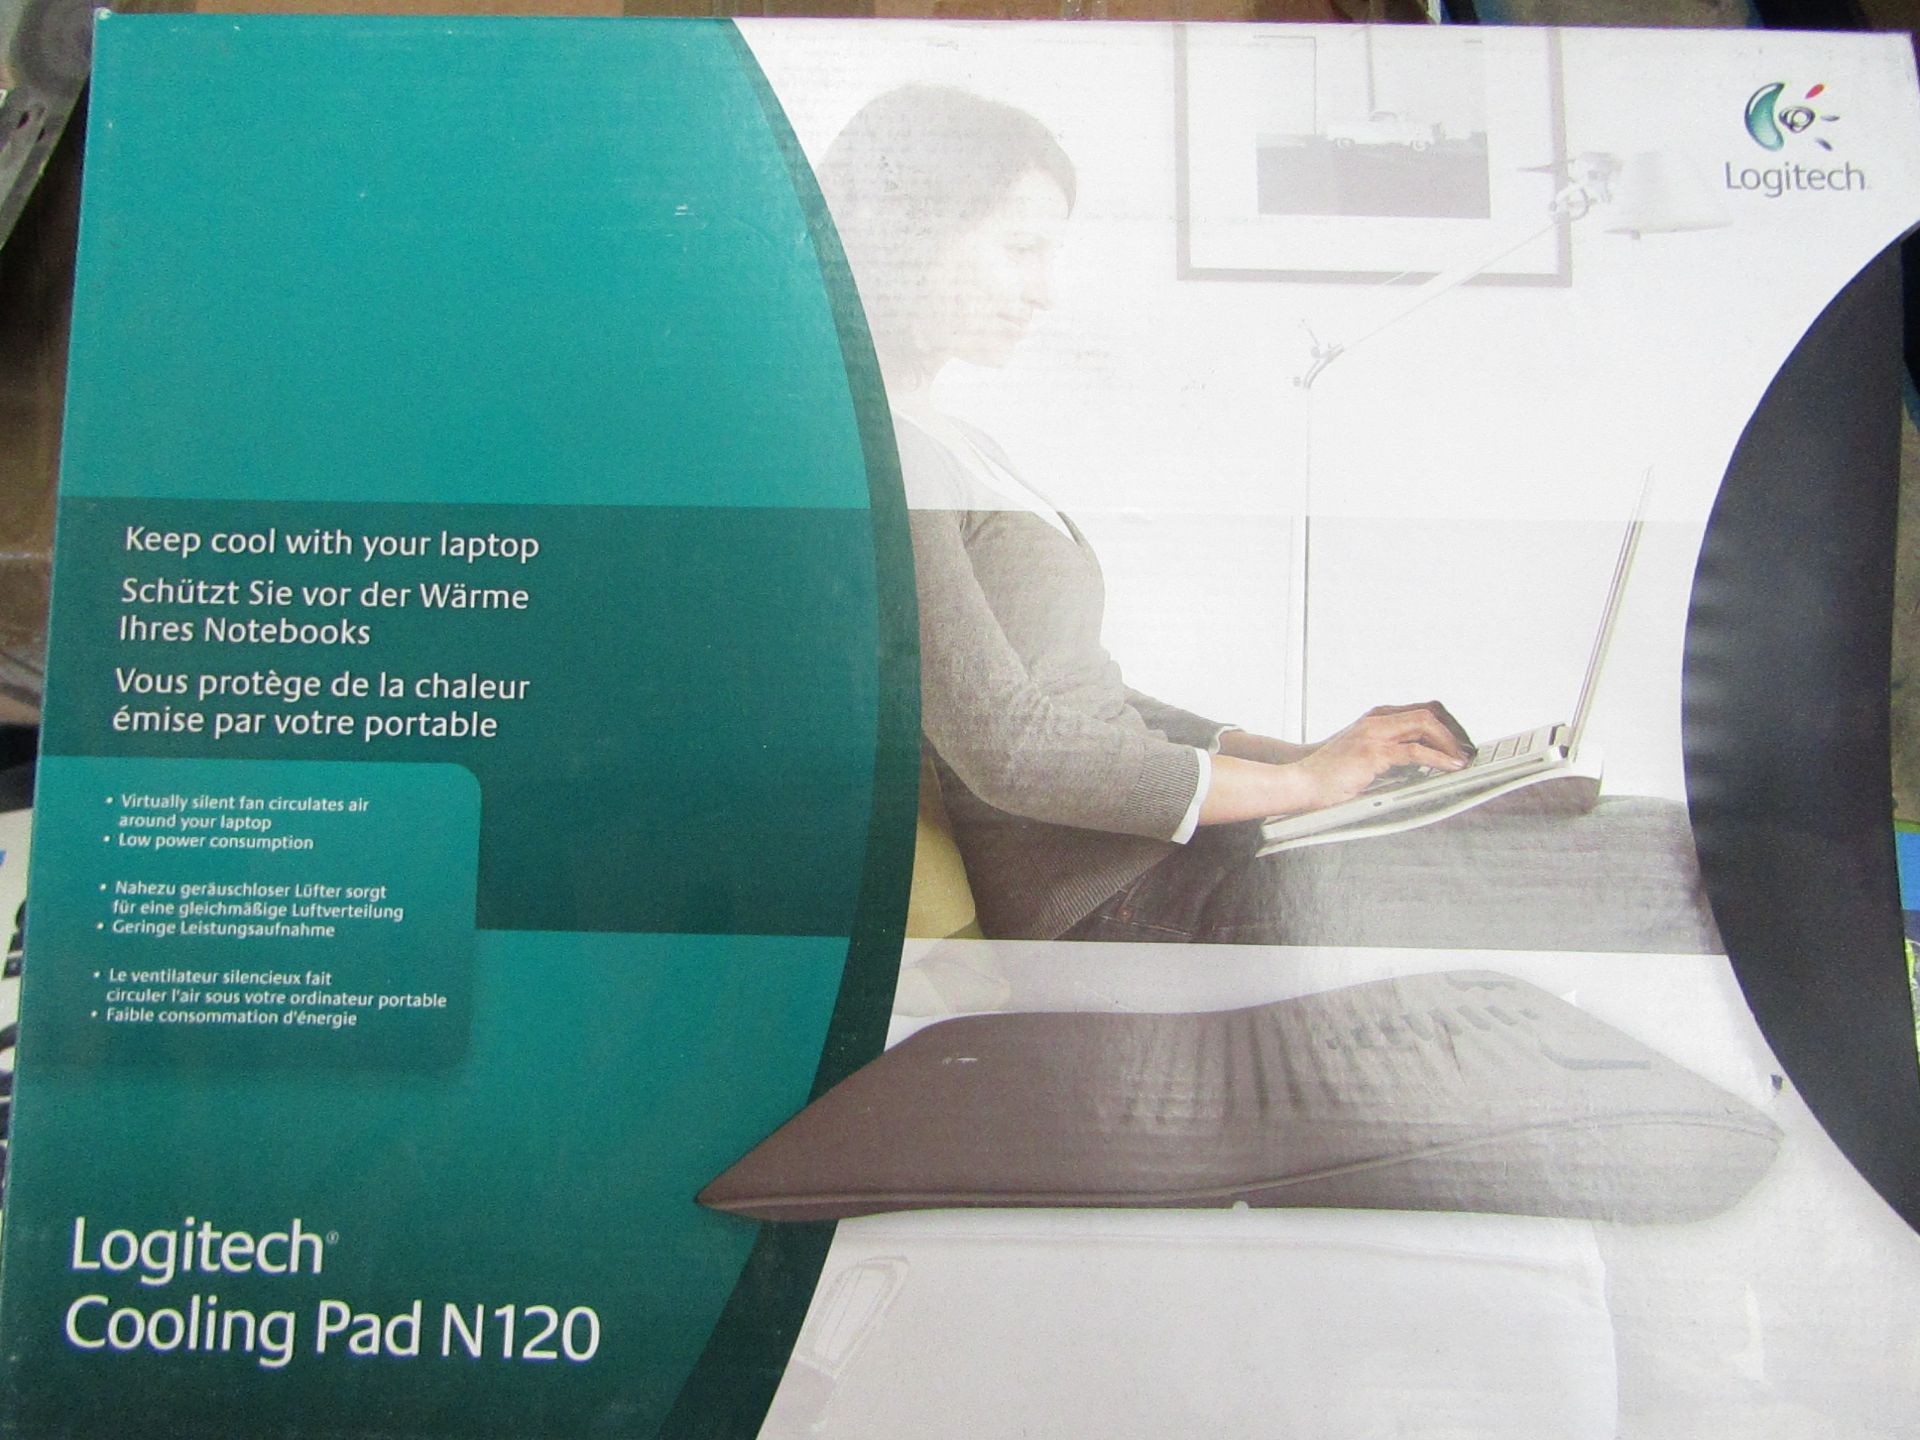 Logitech, Cooling pad N120, Boxed and tested working